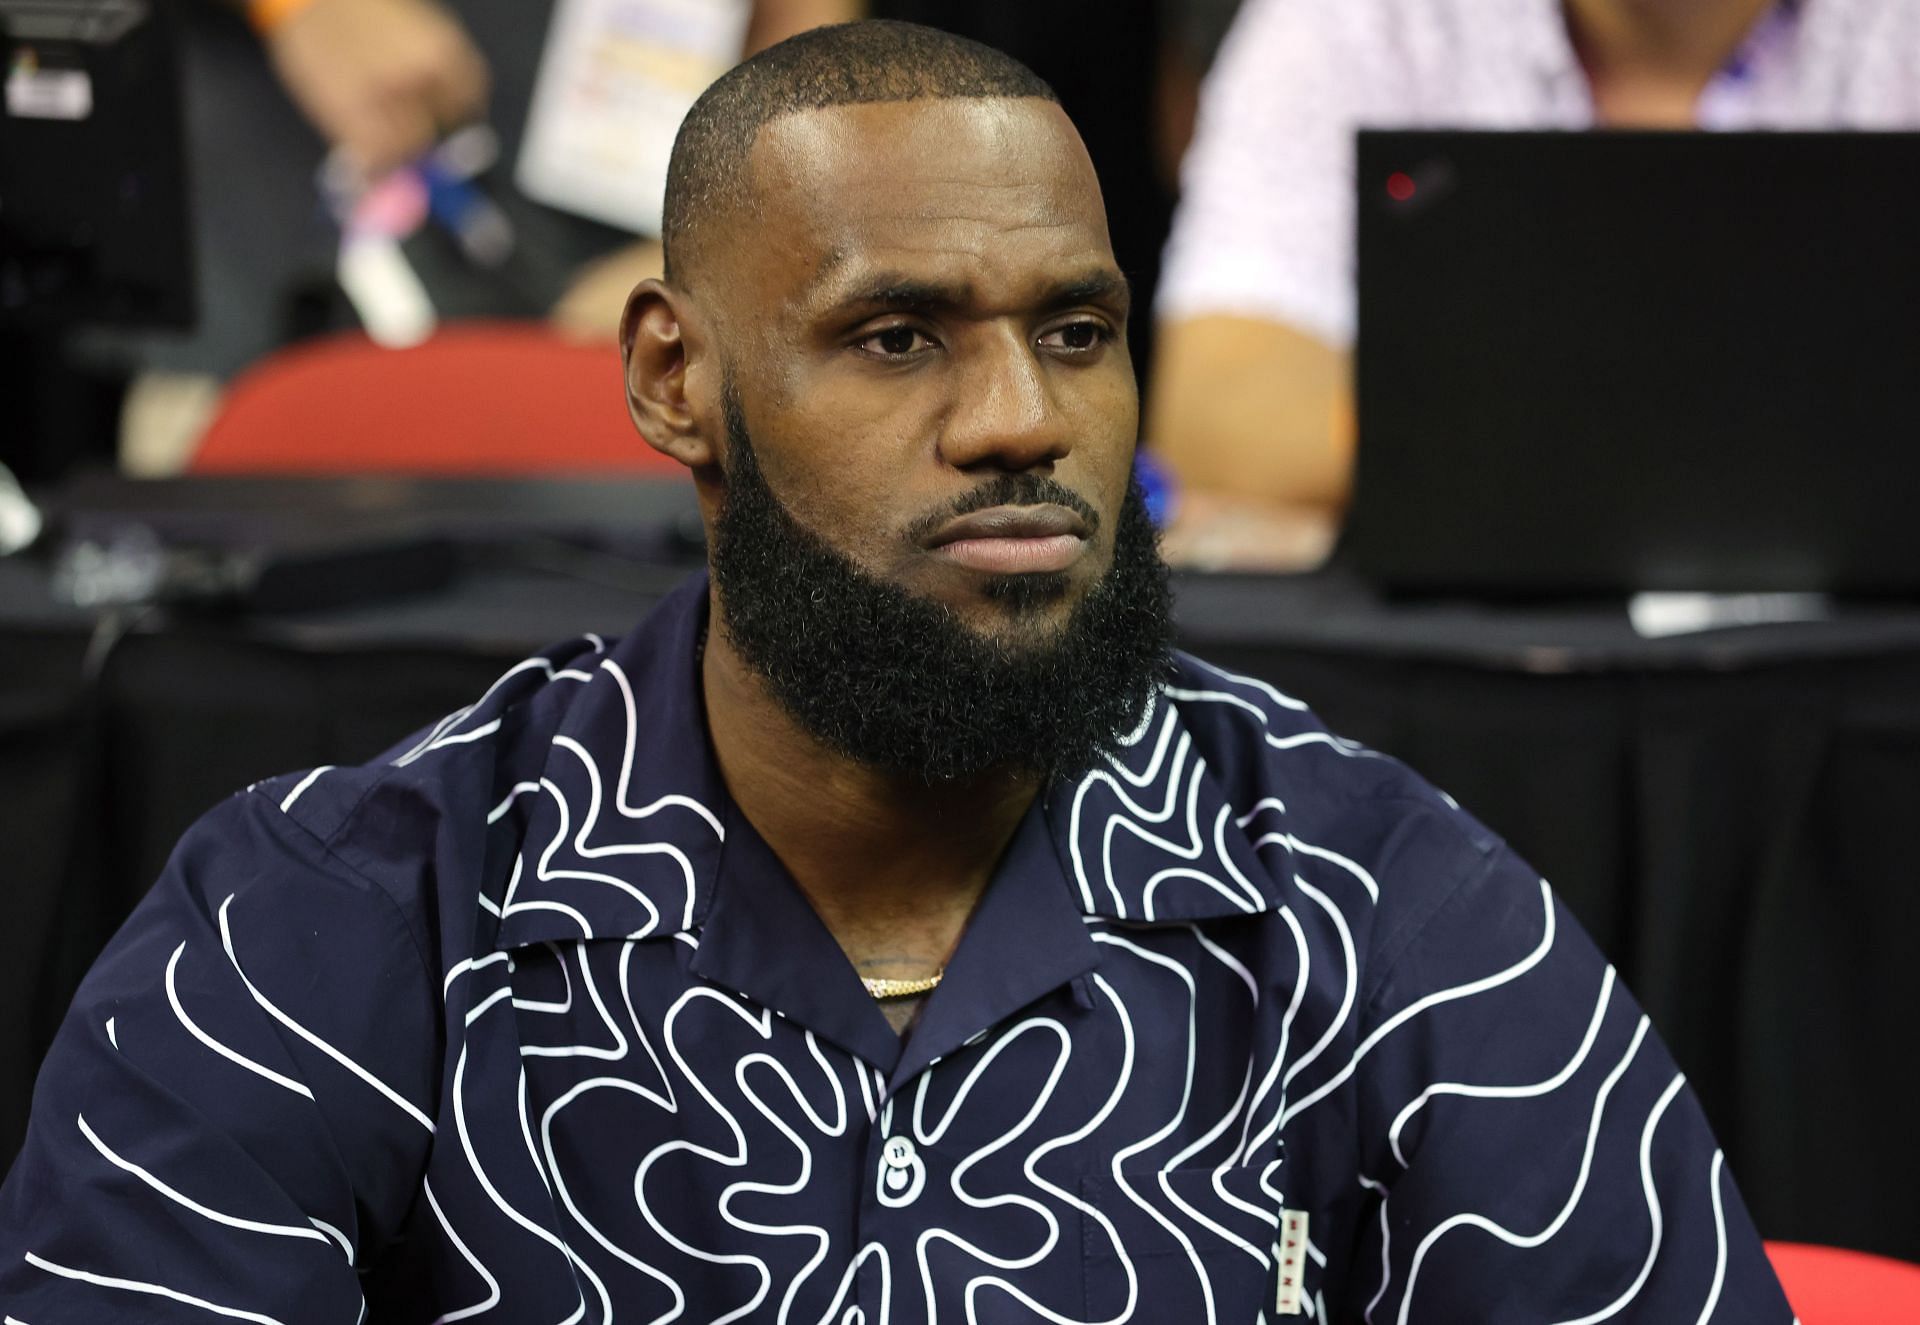 LeBron James of the LA Lakers attends an NBA Summer League game